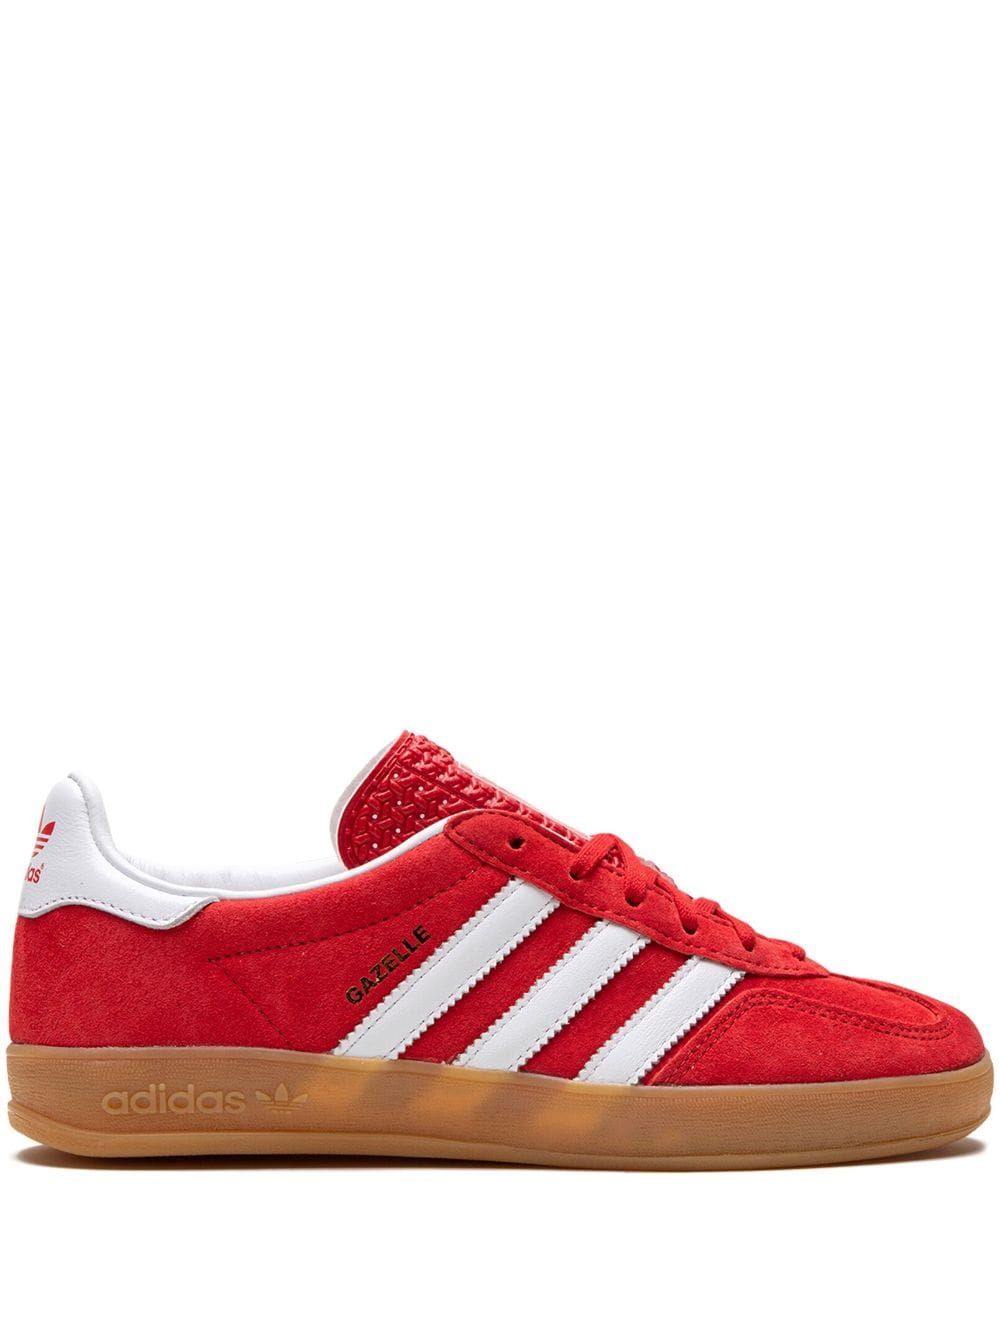 The DetailsNew SeasonadidasGazelle Indoor "Scarlet/Cloud White" sneakersFrom the 60s to the prese... | Farfetch Global